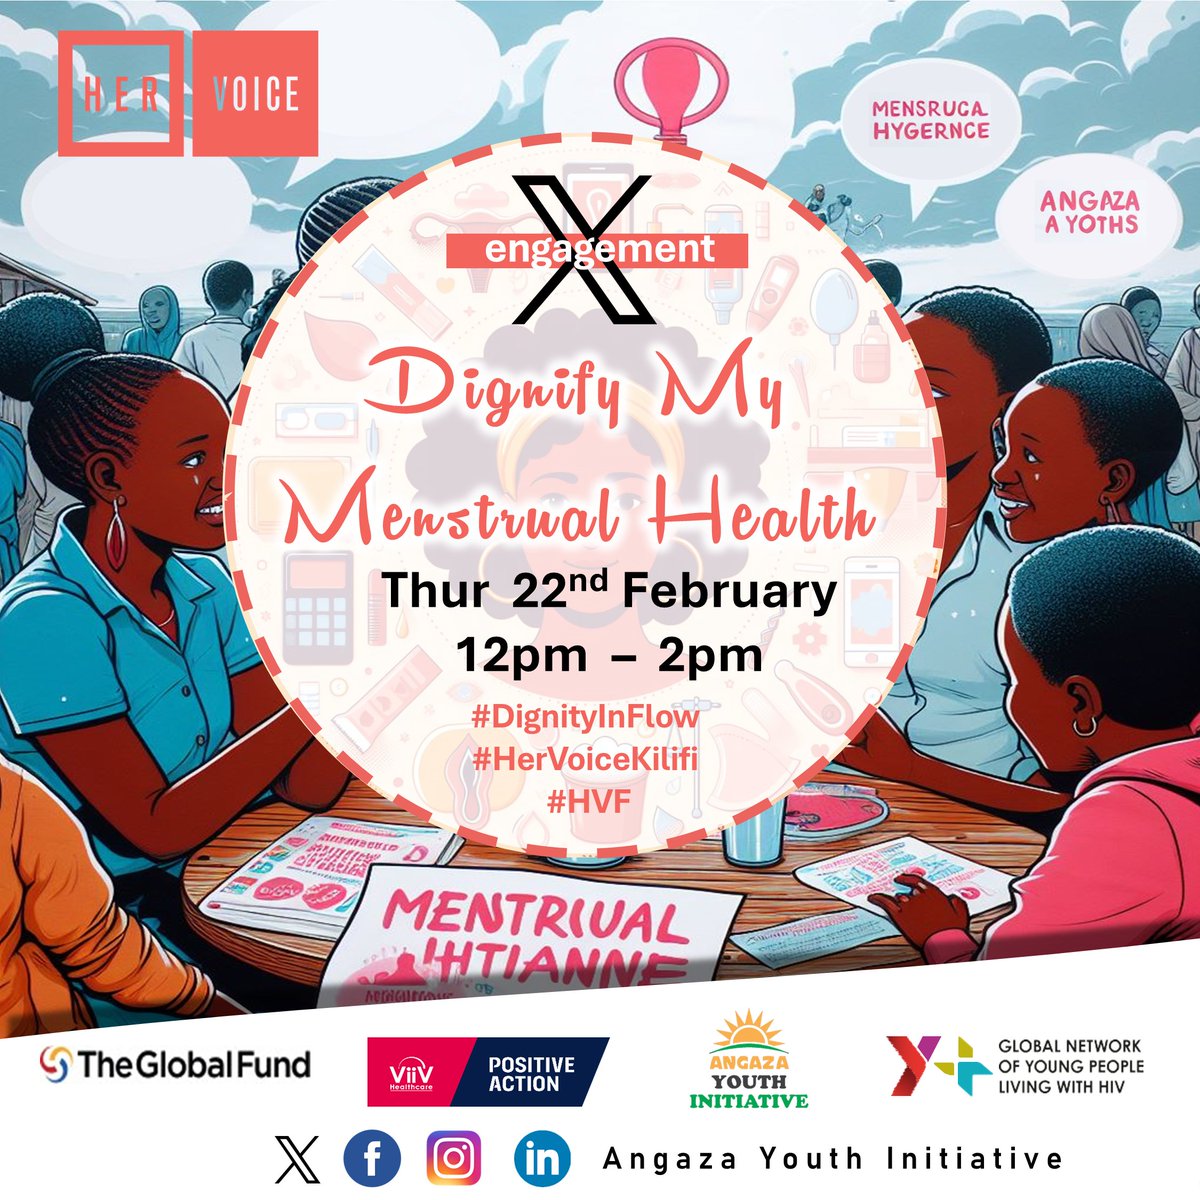 Every #AGYW 👭🏿deserves to manage their periods🩸 with confidence & dignity, which then promotes a sense of self-worth & empowerment. Join us for an X engagement on matters #MenstrualHygieneManagement on Thur 22nd as from 12PM. #HERVoiceKilifi #DignityInFlow #HVF See poster⤵️